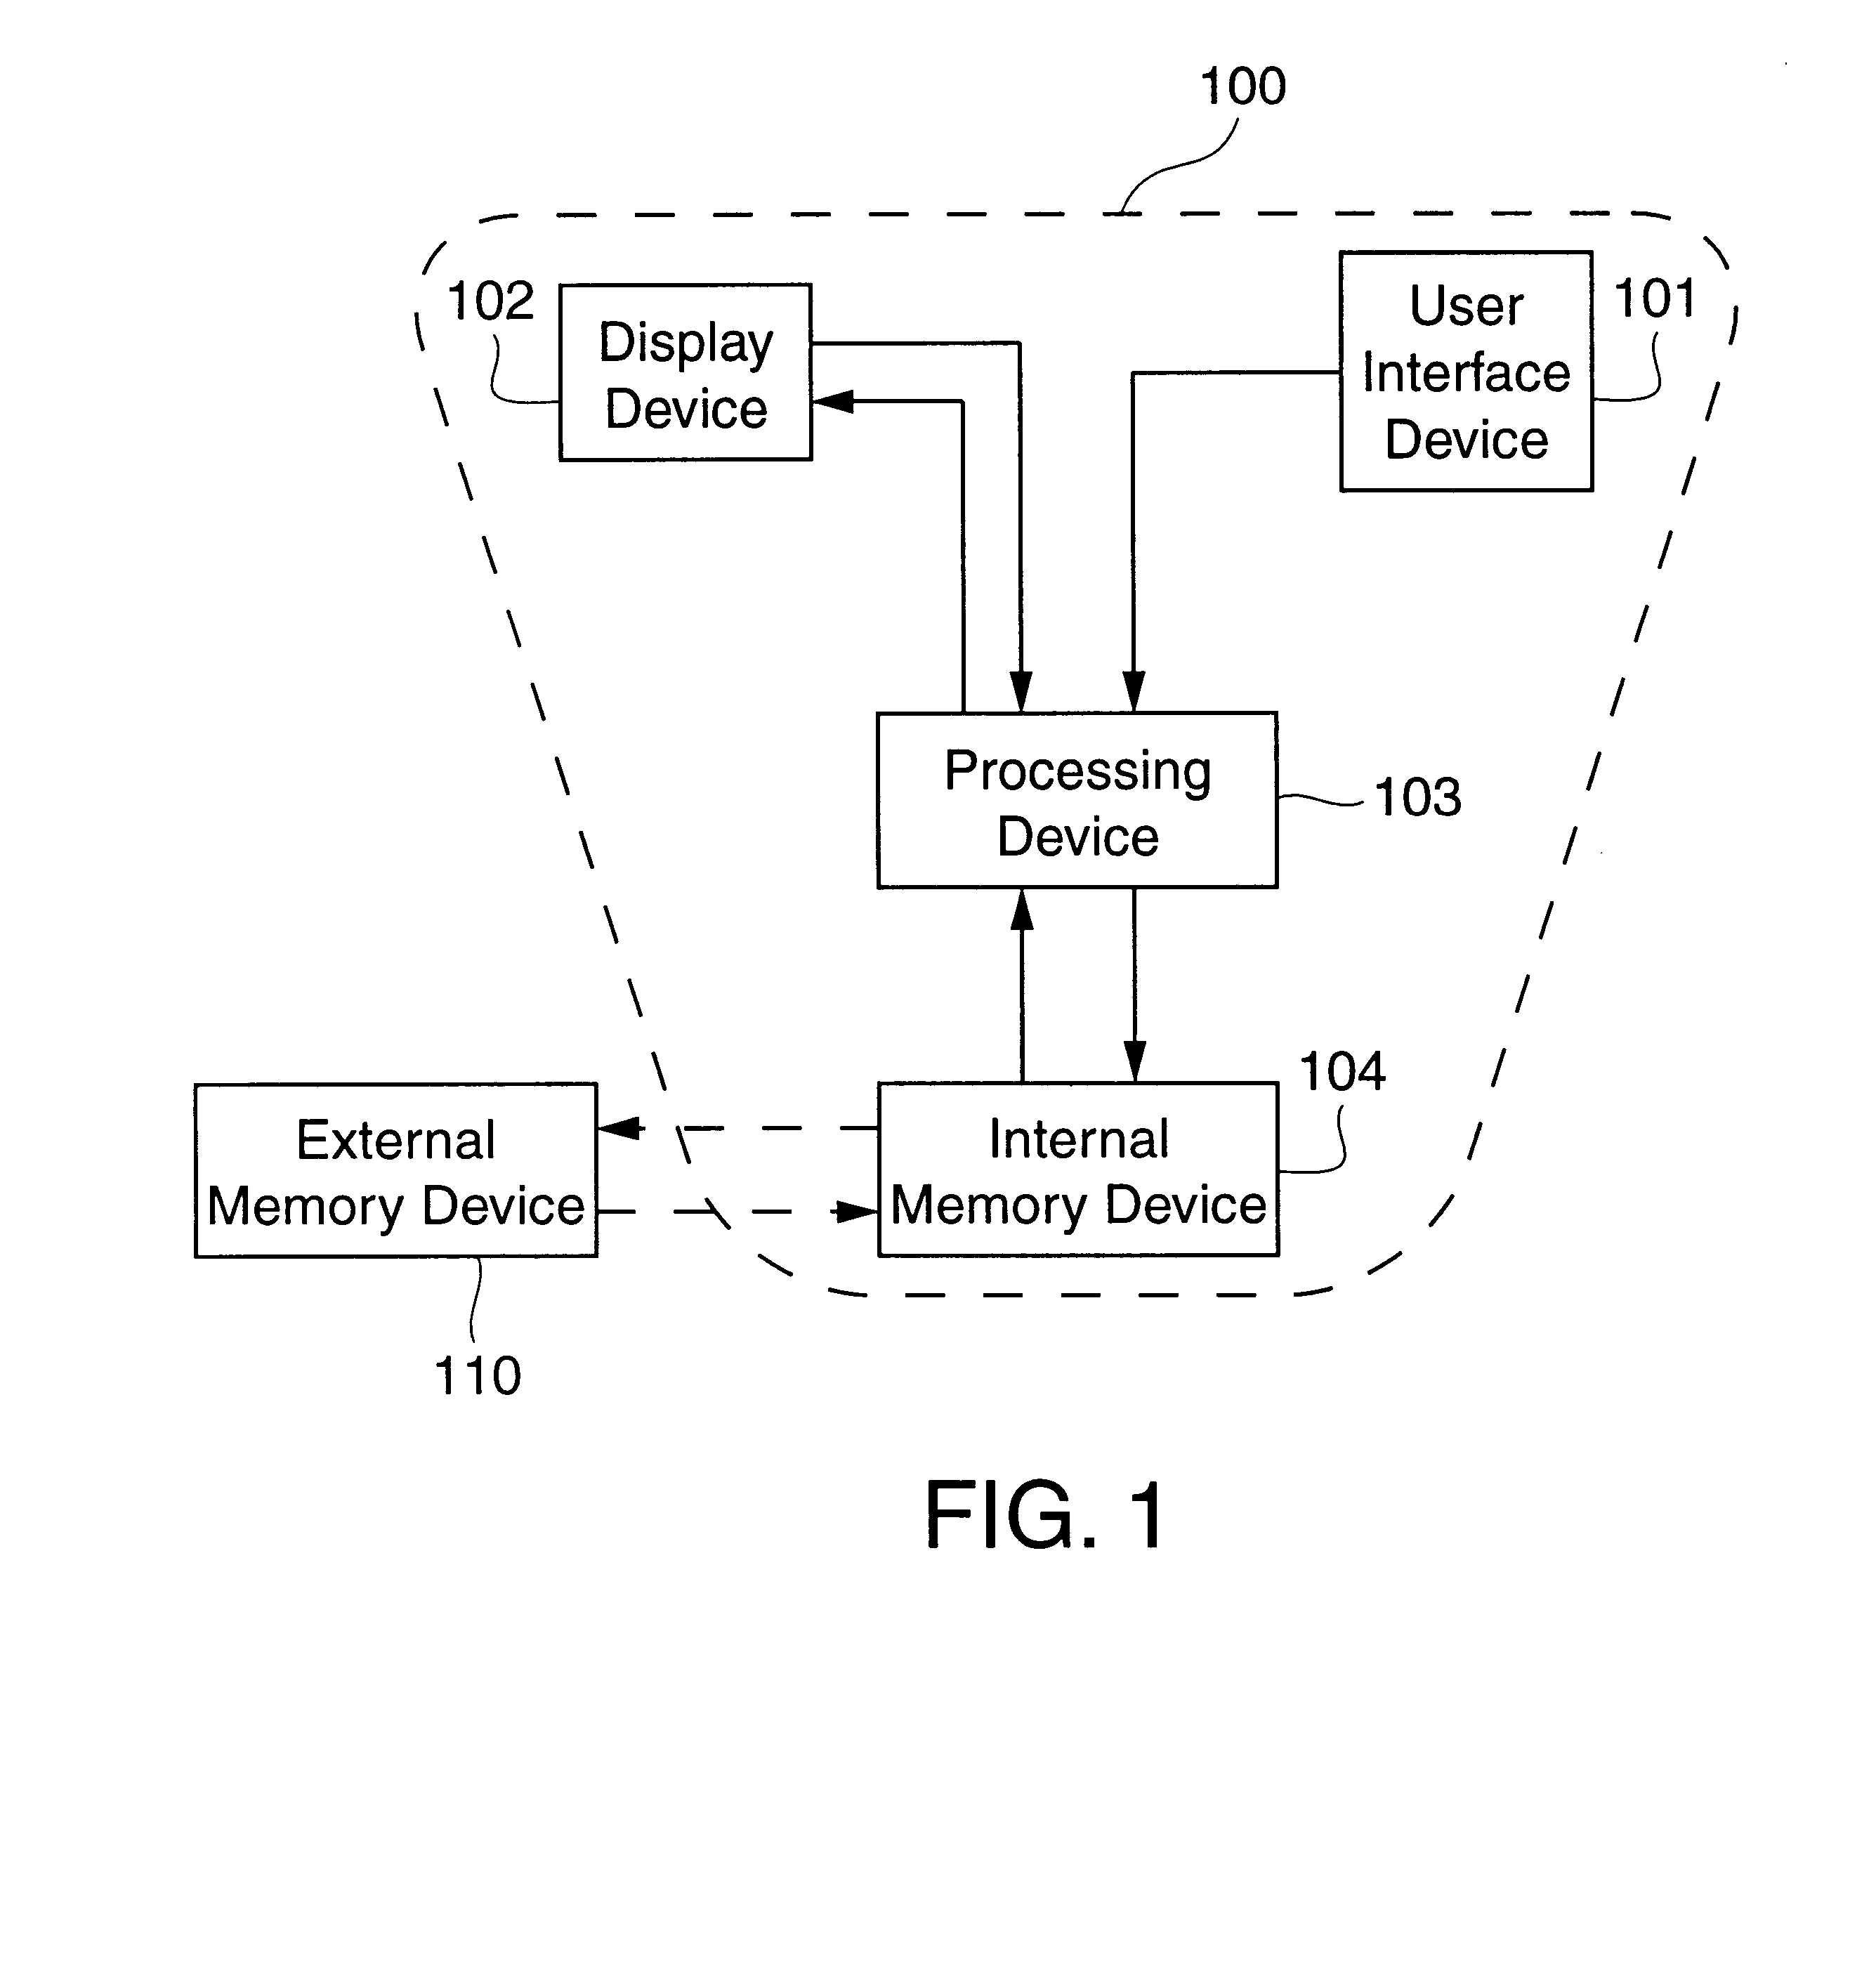 Iterative repair optimization with particular application to scheduling for integrated capacity and inventory planning